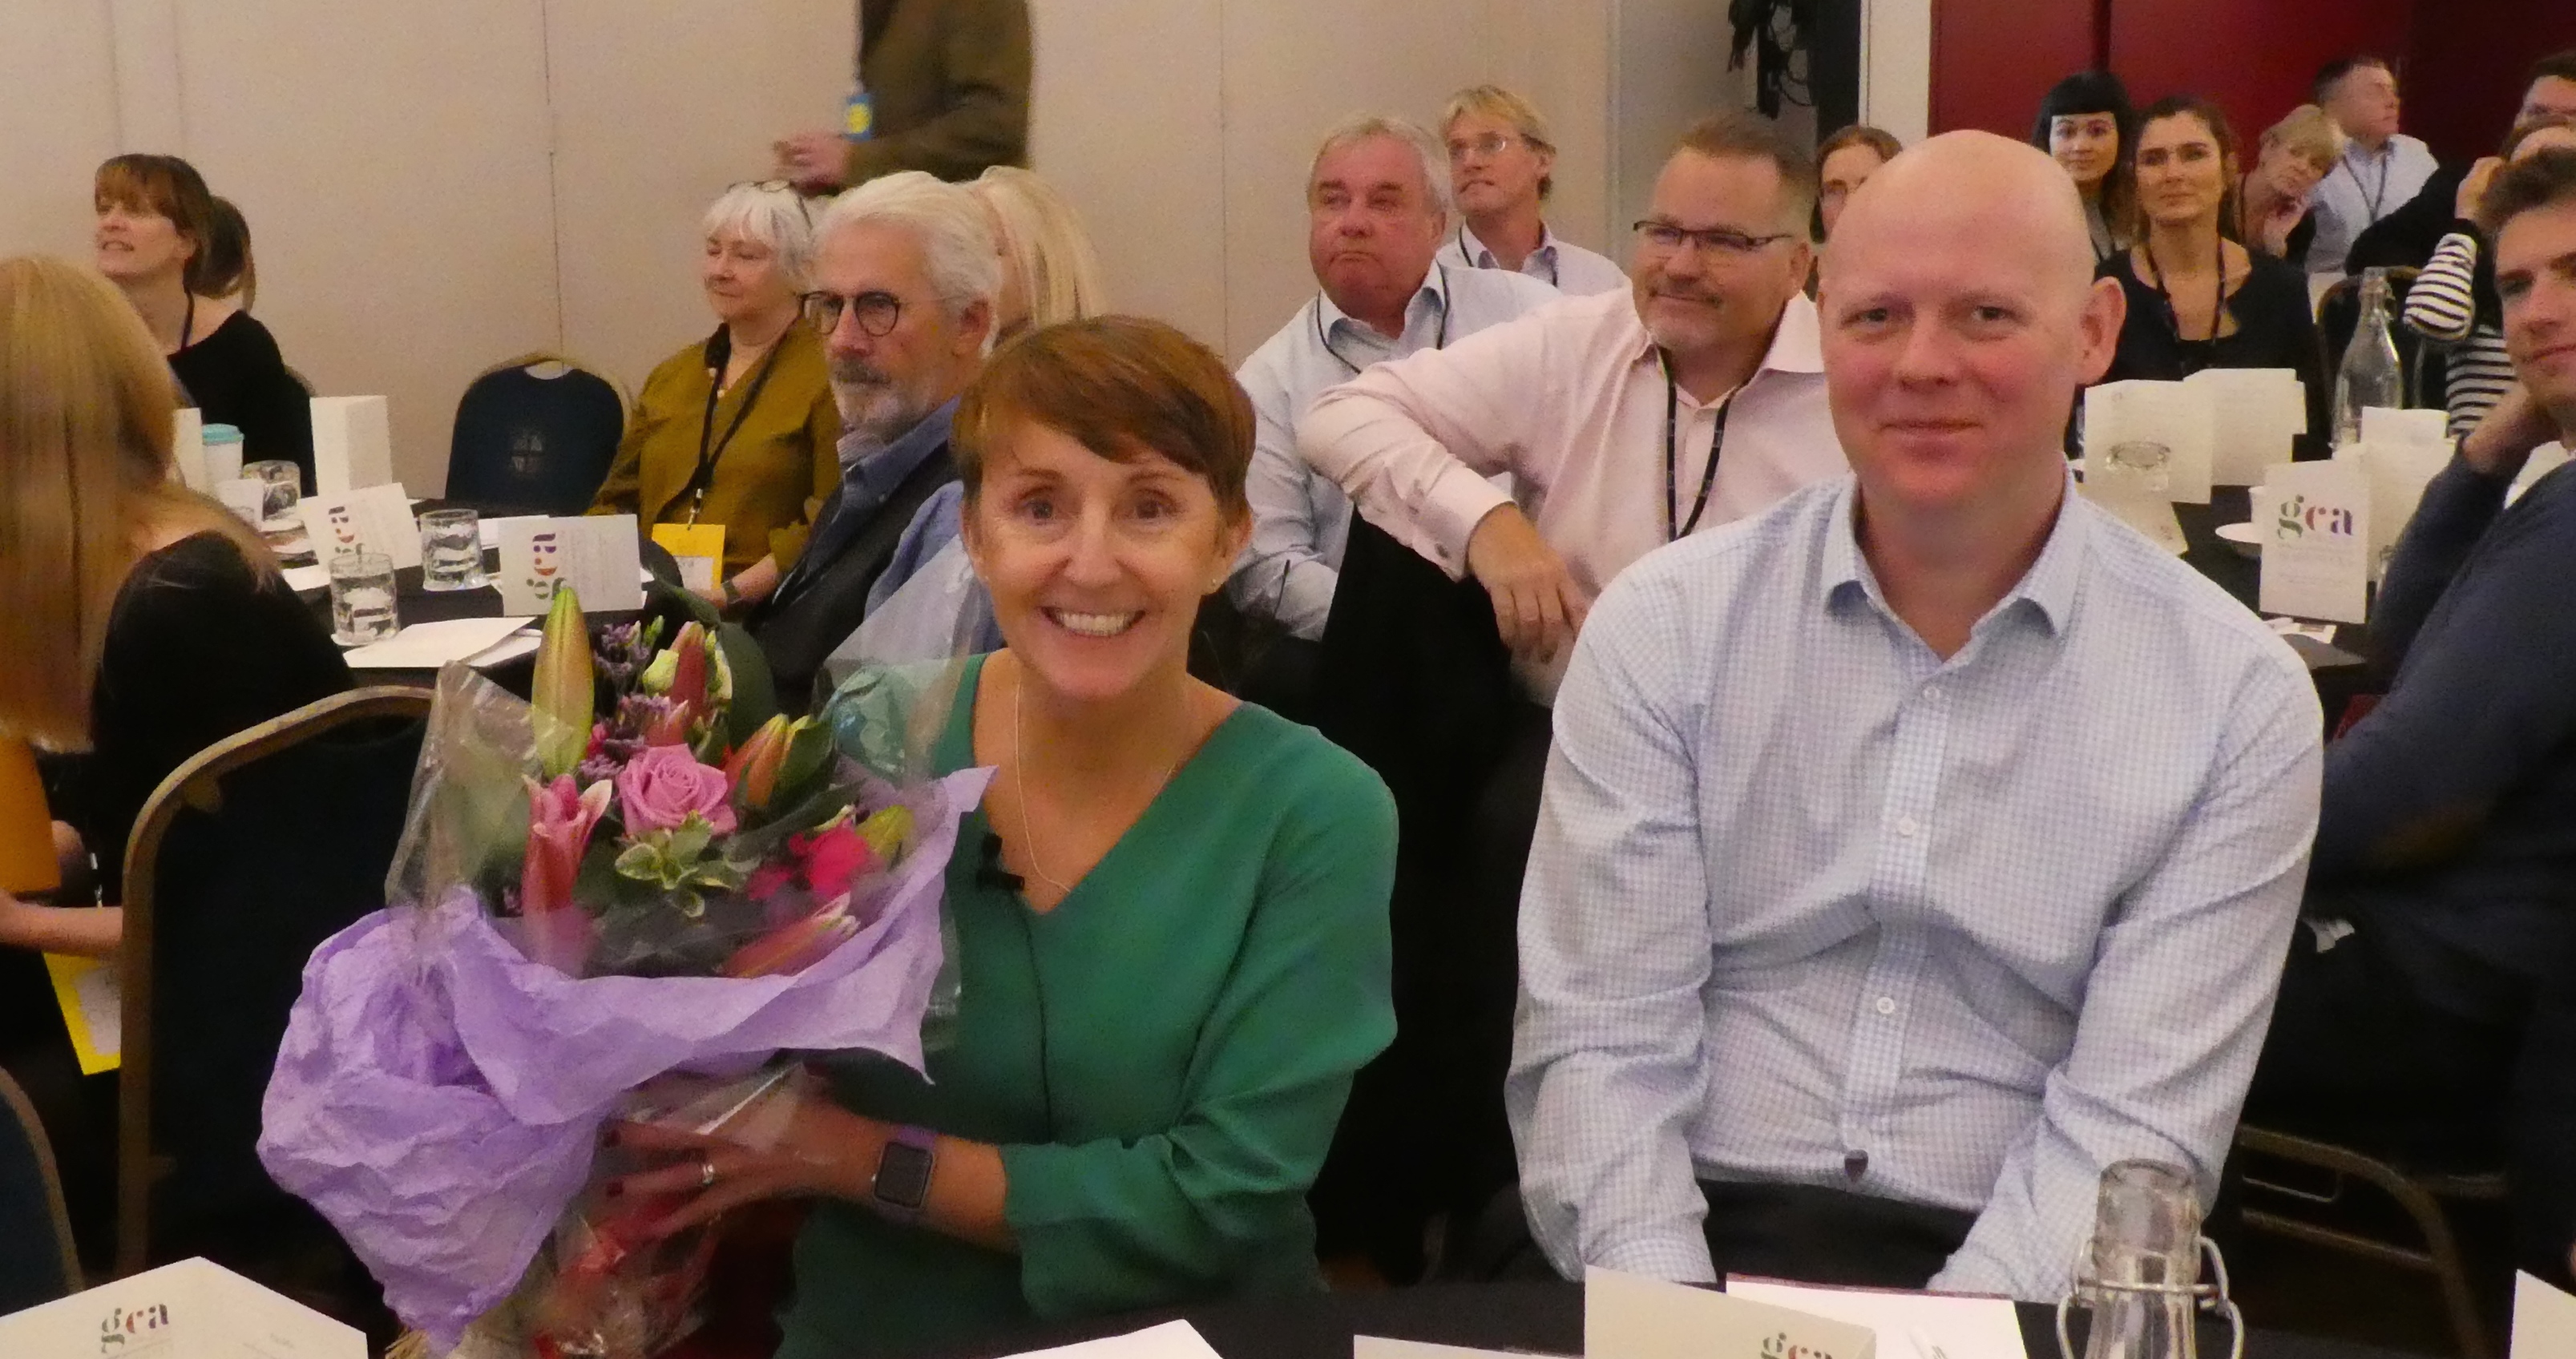 Above: Ceri Stirland was presented with a bouquet of flowers as a token of appreciation for all her work as president and longstanding council member. Her colleague Darren Cave (right) has just joined the council thereby maintaining a UKG presence. 